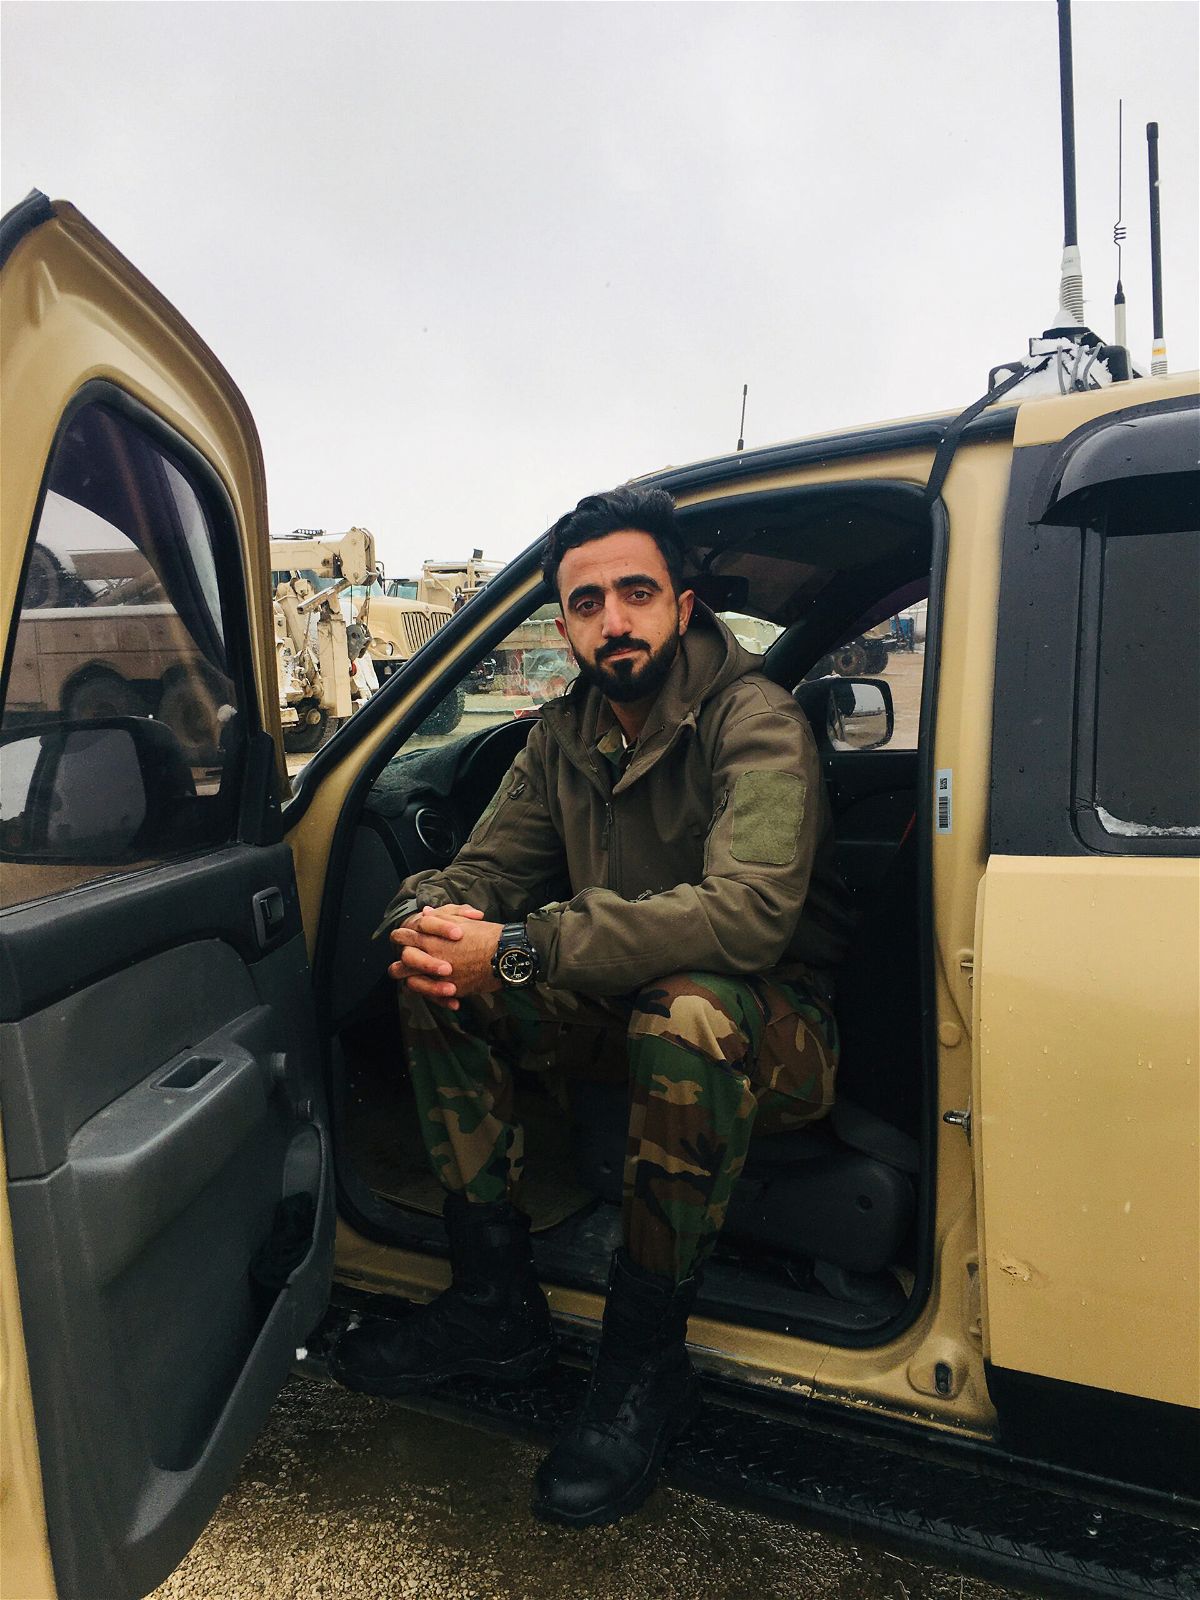 <i>Credit Sami-ullah Safi</i><br/>Criminal charges have been dropped against an Afghan national who served with the US military in Afghanistan and was apprehended after fleeing to the US by crossing the southern border with Mexico.